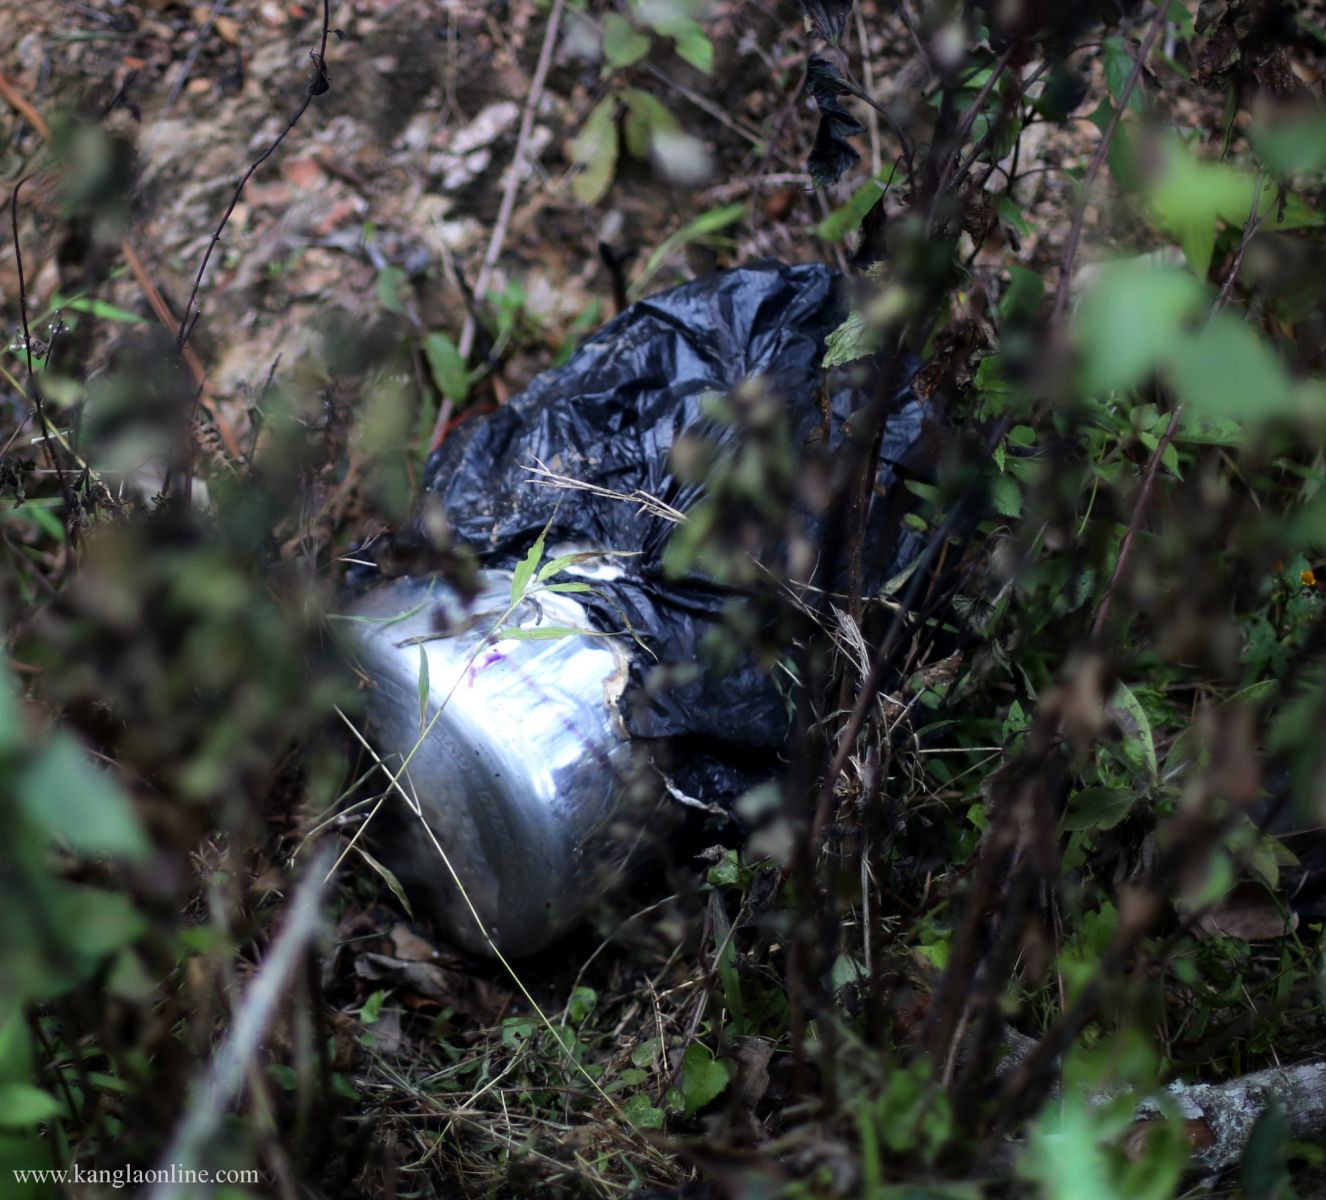 IED bomb was implanted in a pressure cooker to ambush the Indian Army by militants at Paraolon, Chandel District, Manipur. Photo by Deepak Shijagurumayum. 